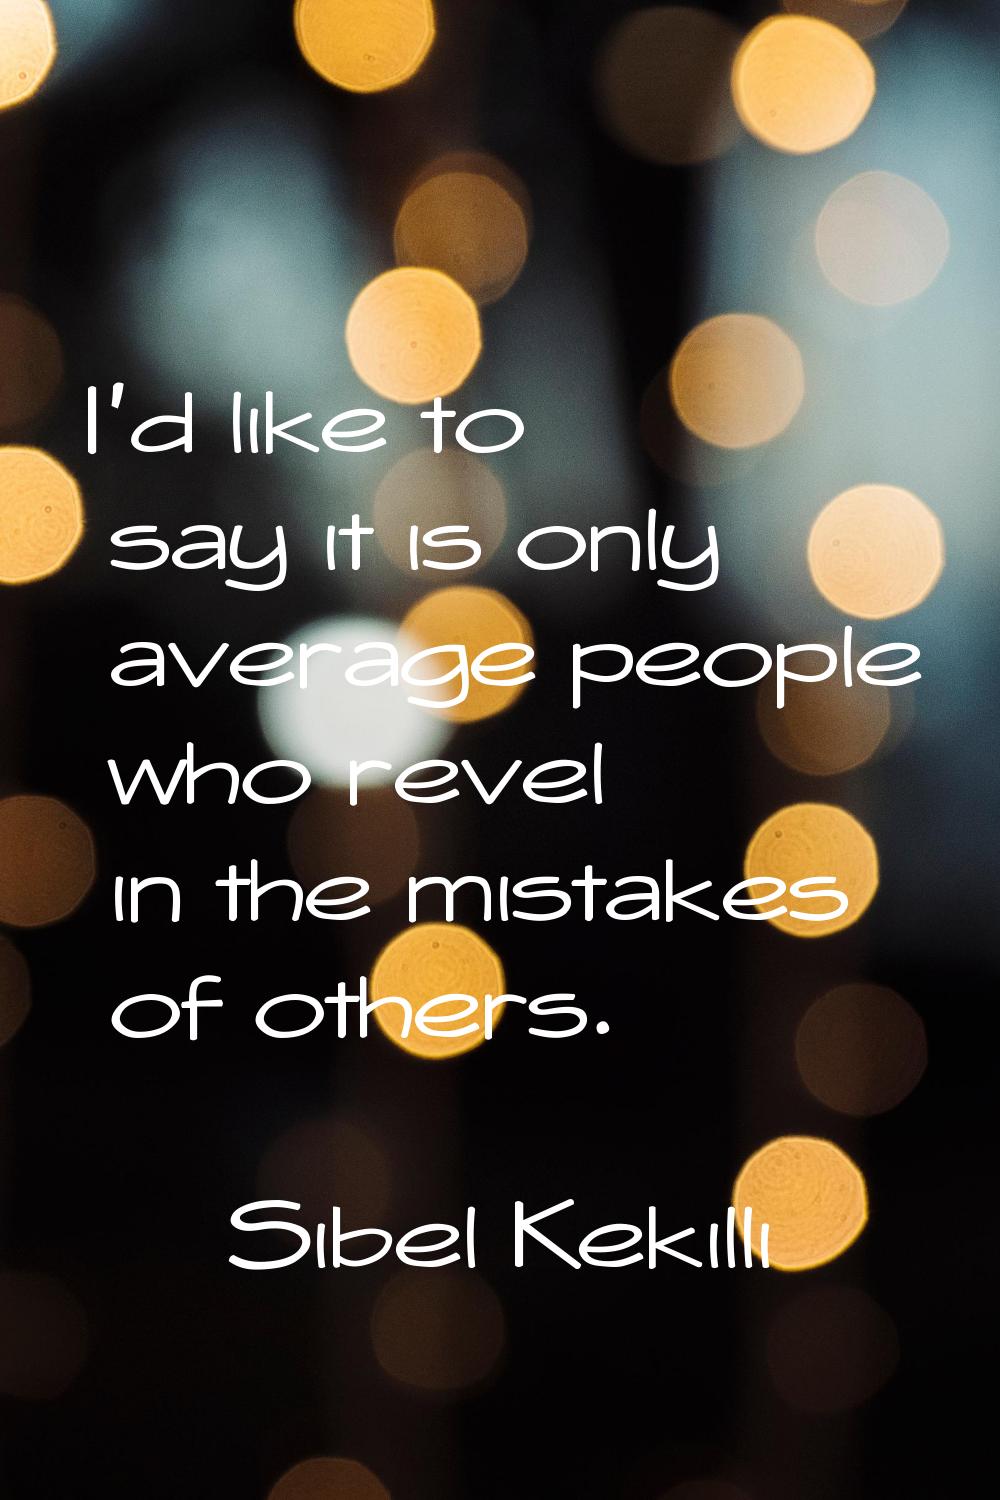 I'd like to say it is only average people who revel in the mistakes of others.